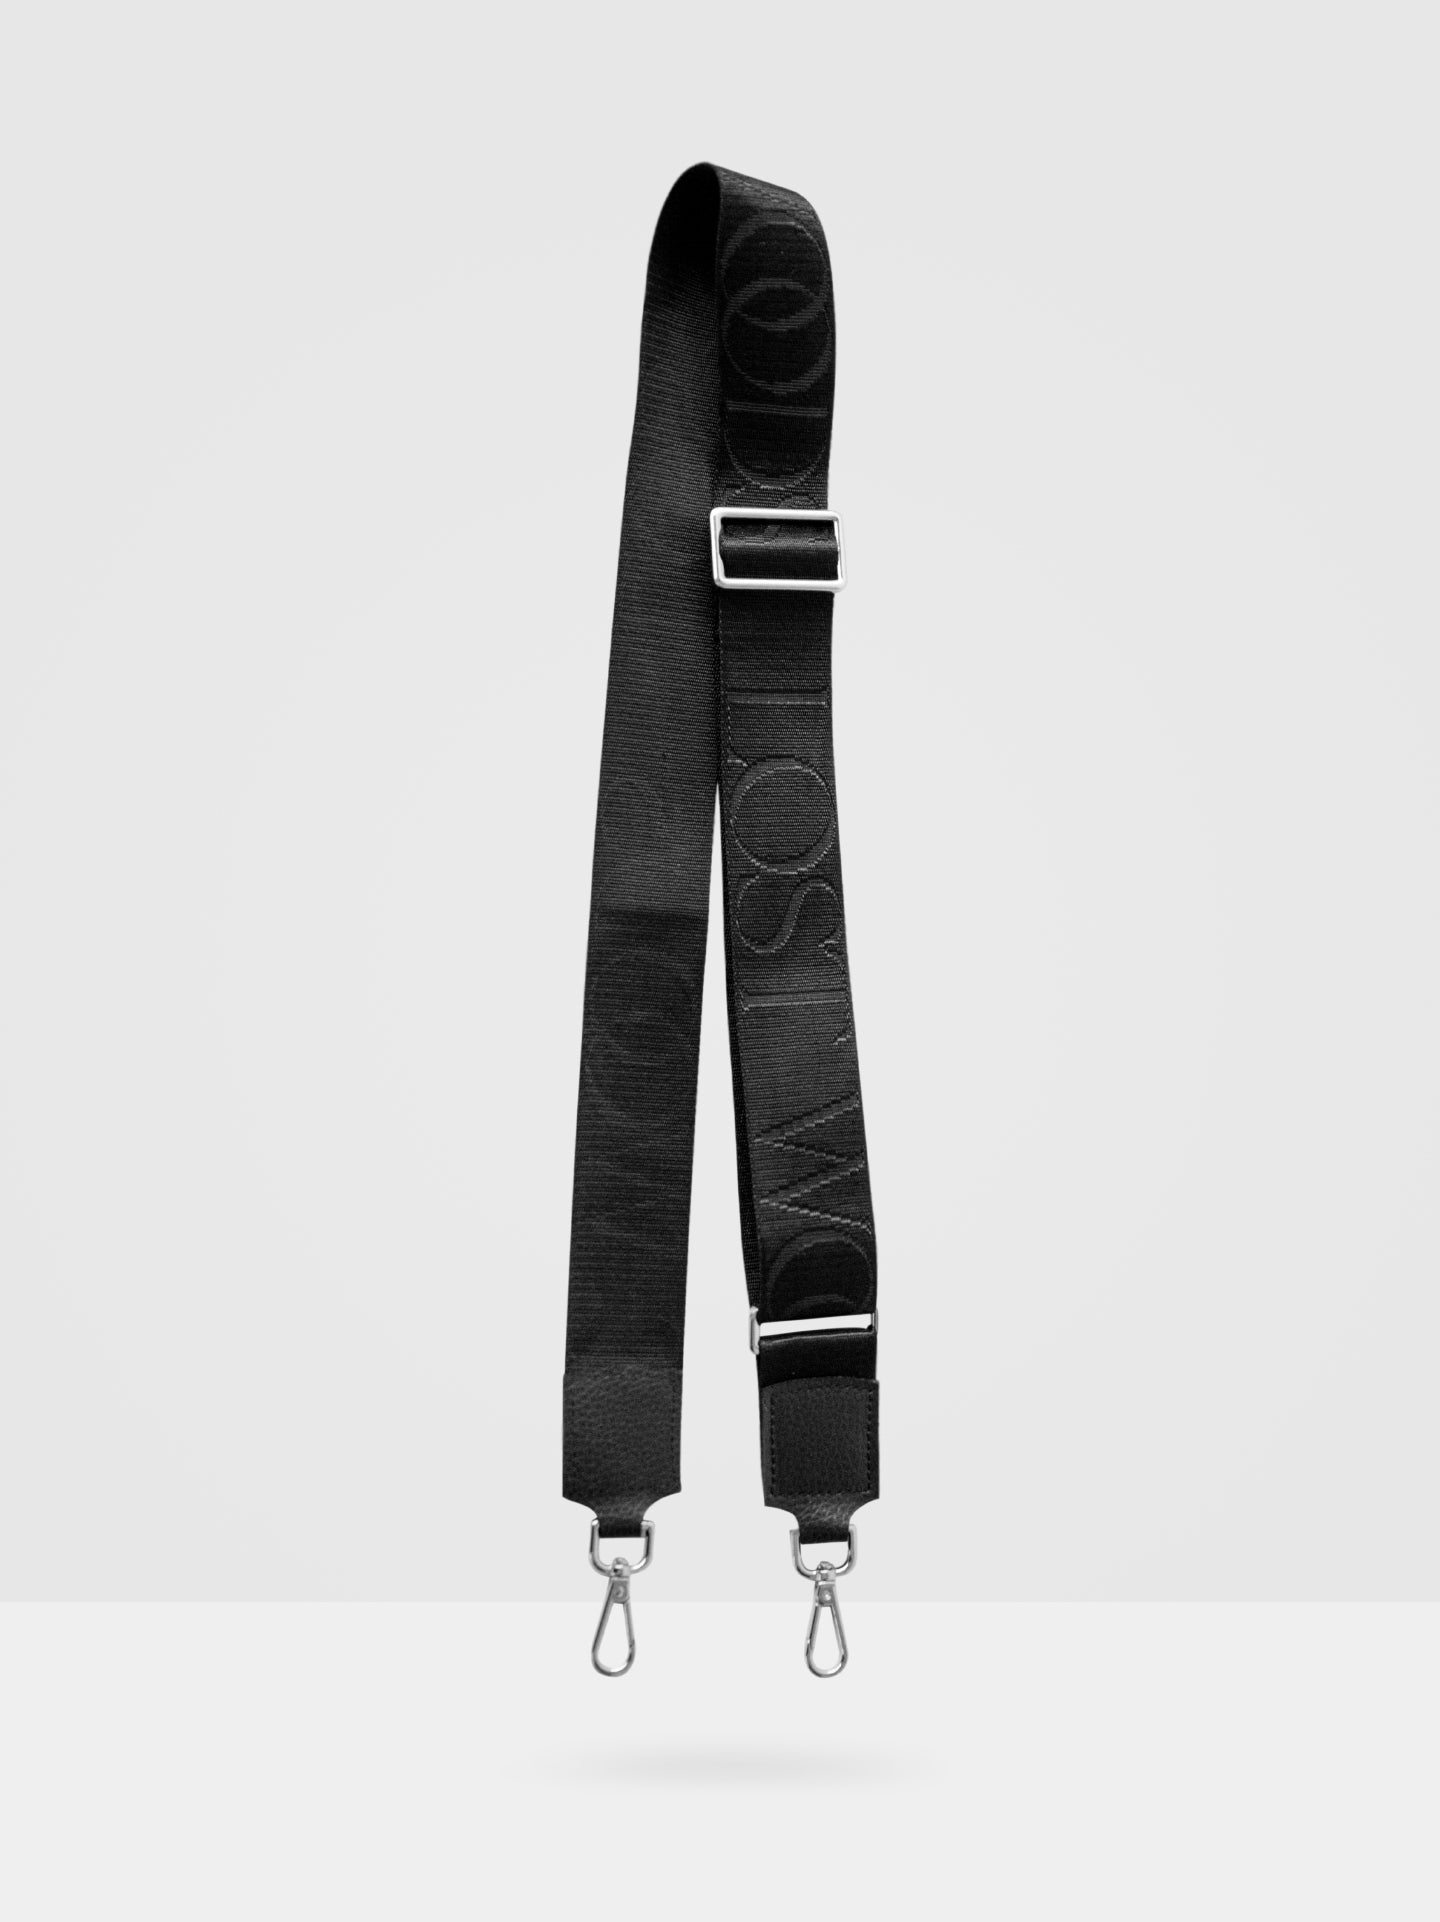 Thick Crossbody Bag Strap, Black and Silver